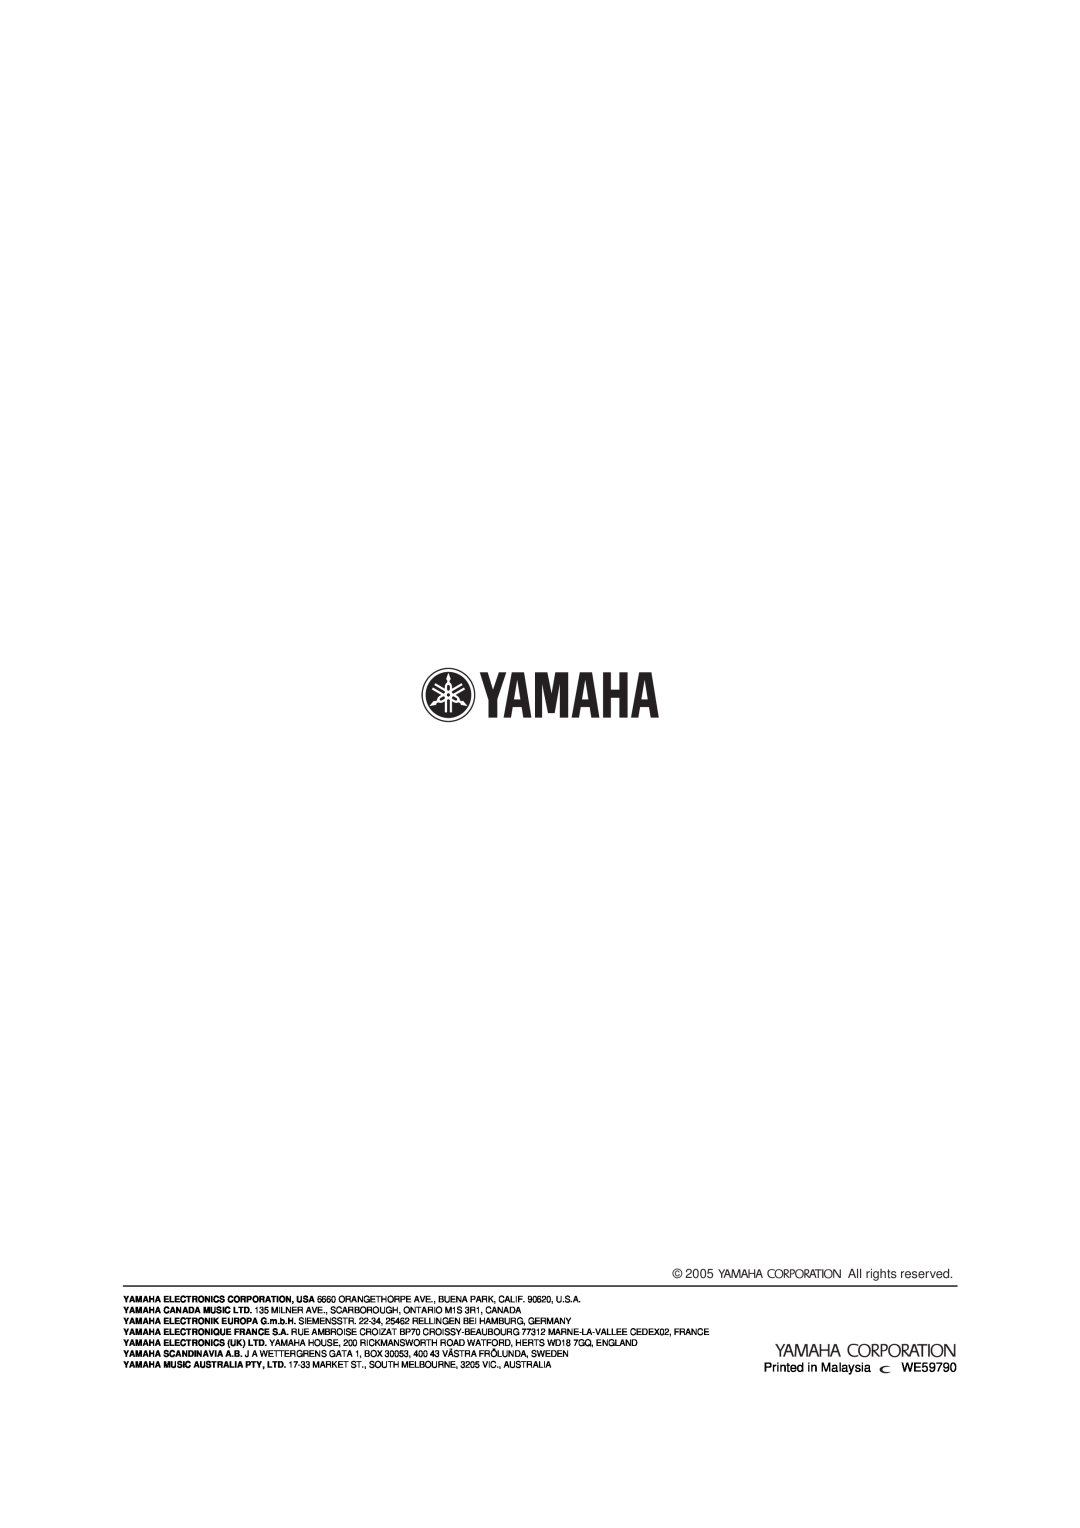 Yamaha RX-V557 owner manual All rights reserved, WE59790 